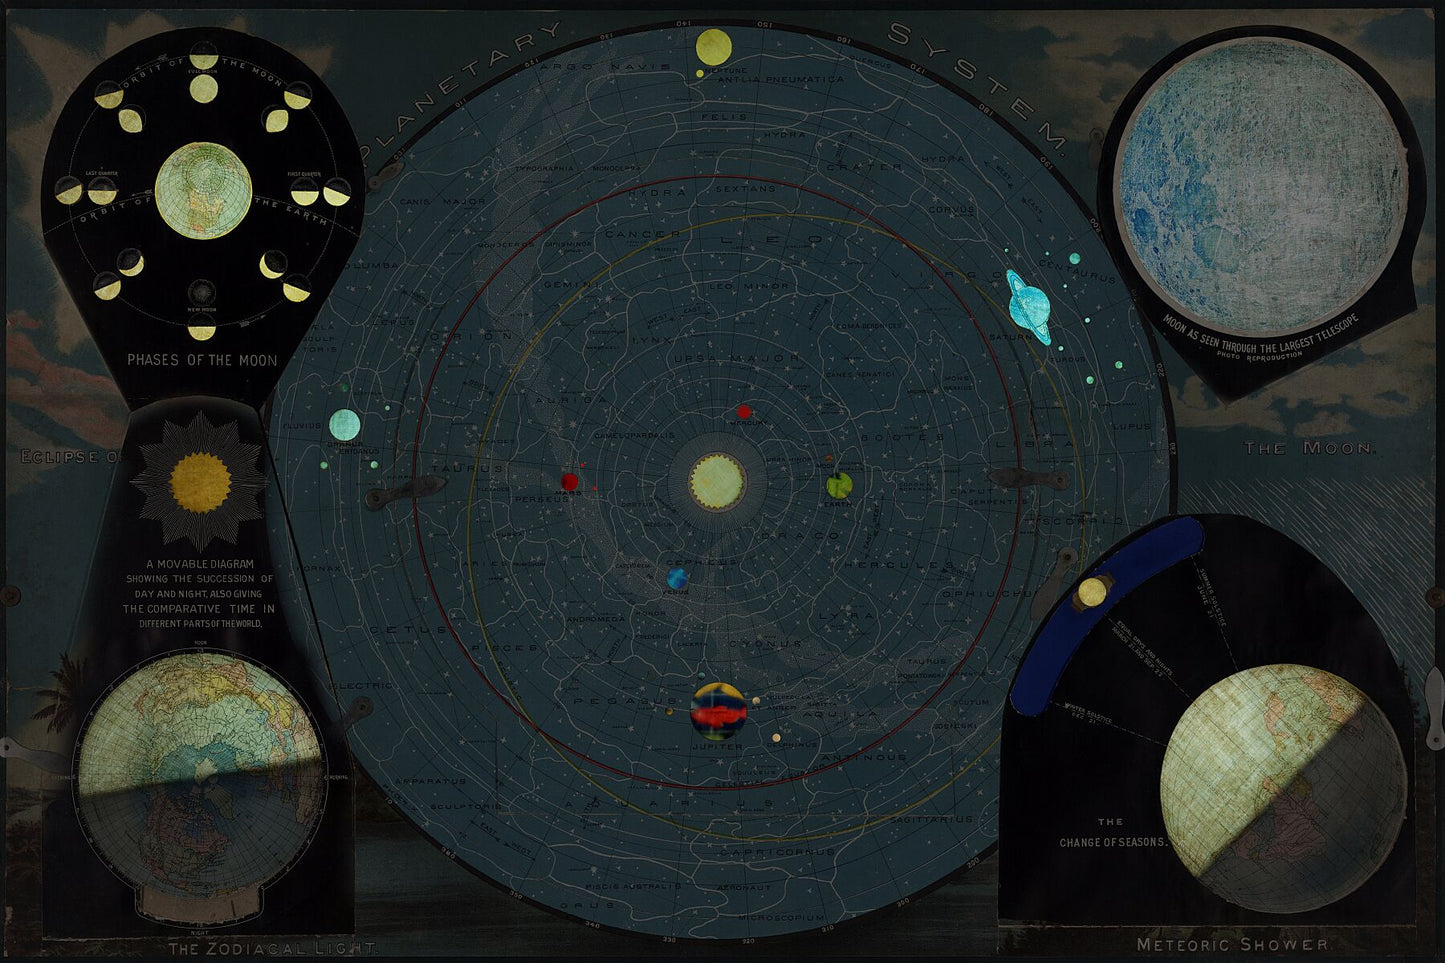 Planetary System by Levi Walter Yaggy - 1887